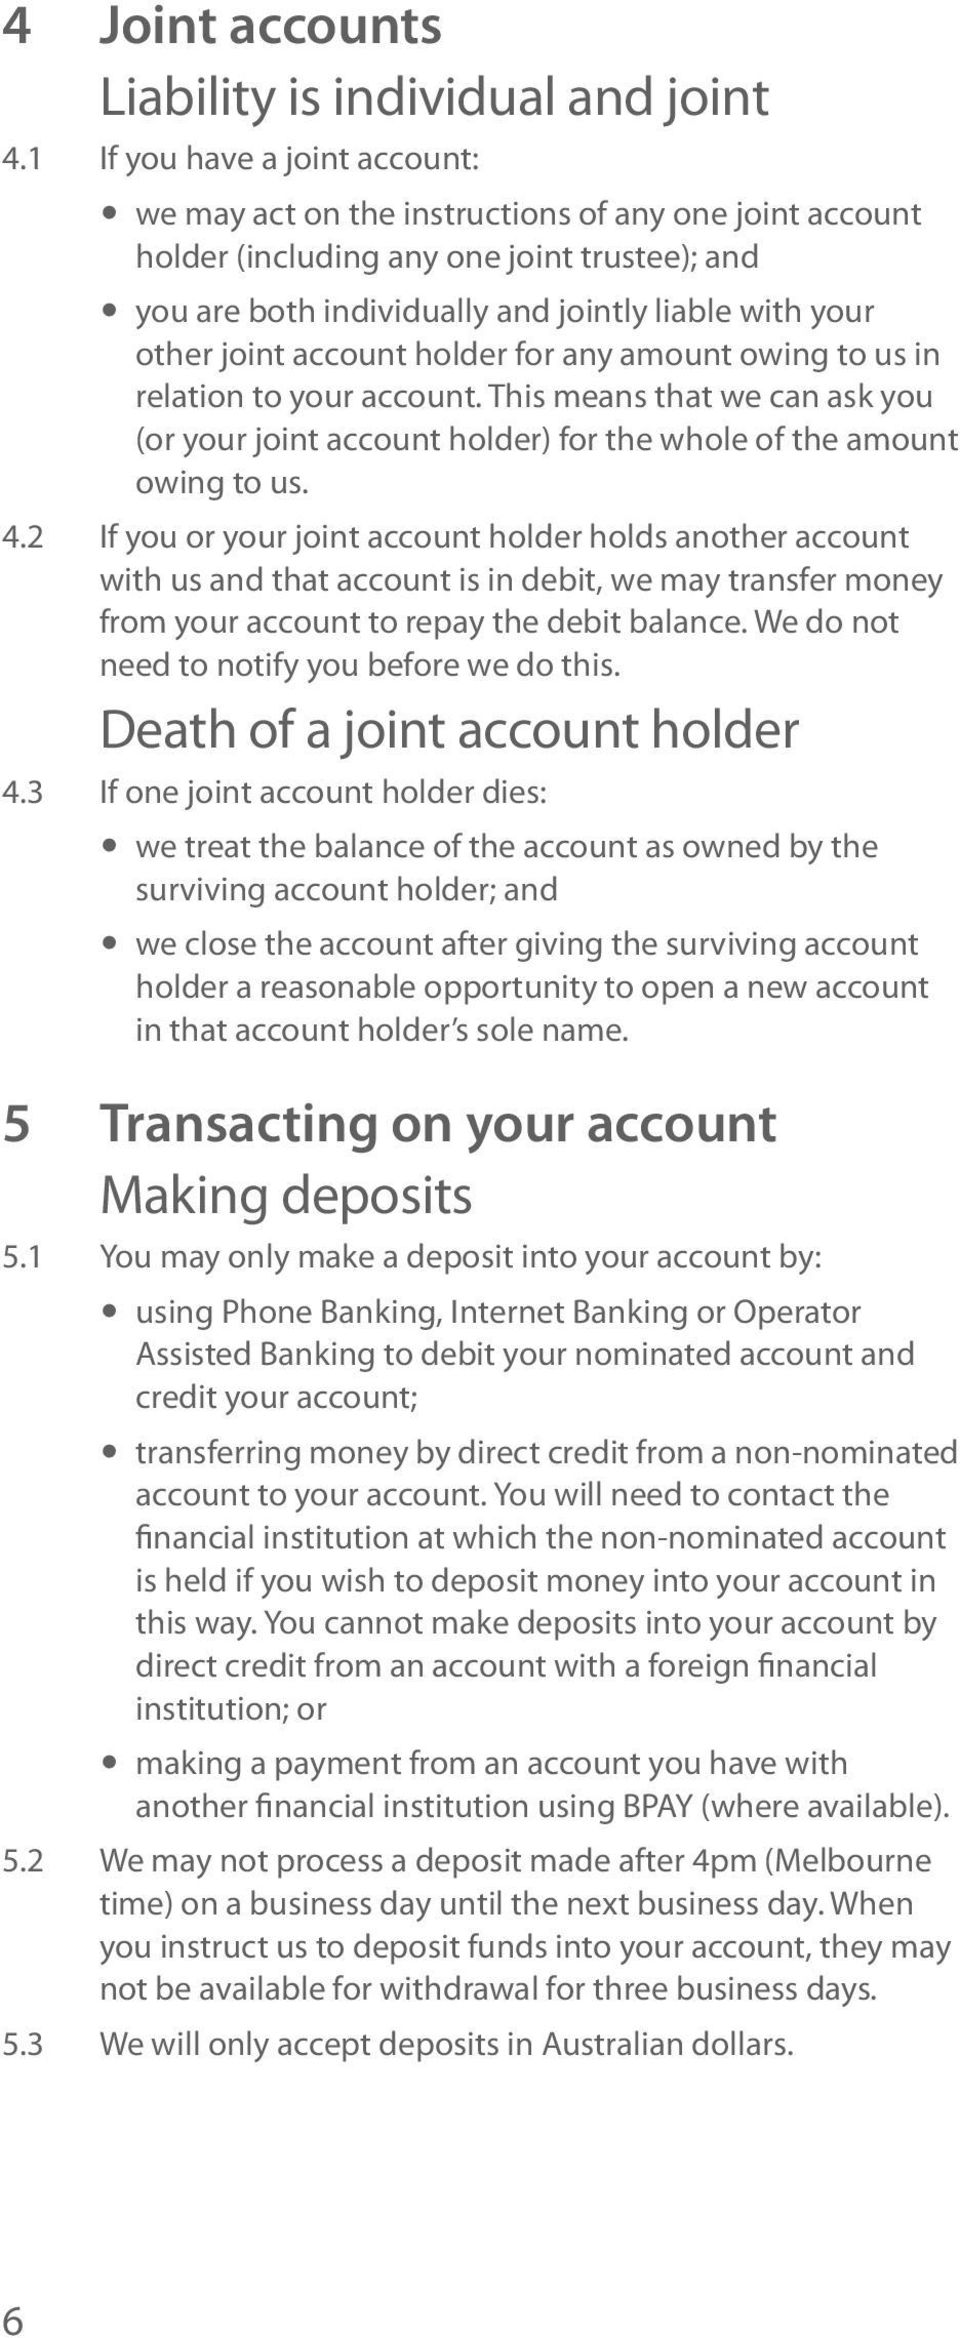 joint account holder for any amount owing to us in relation to your account. This means that we can ask you (or your joint account holder) for the whole of the amount owing to us. 4.